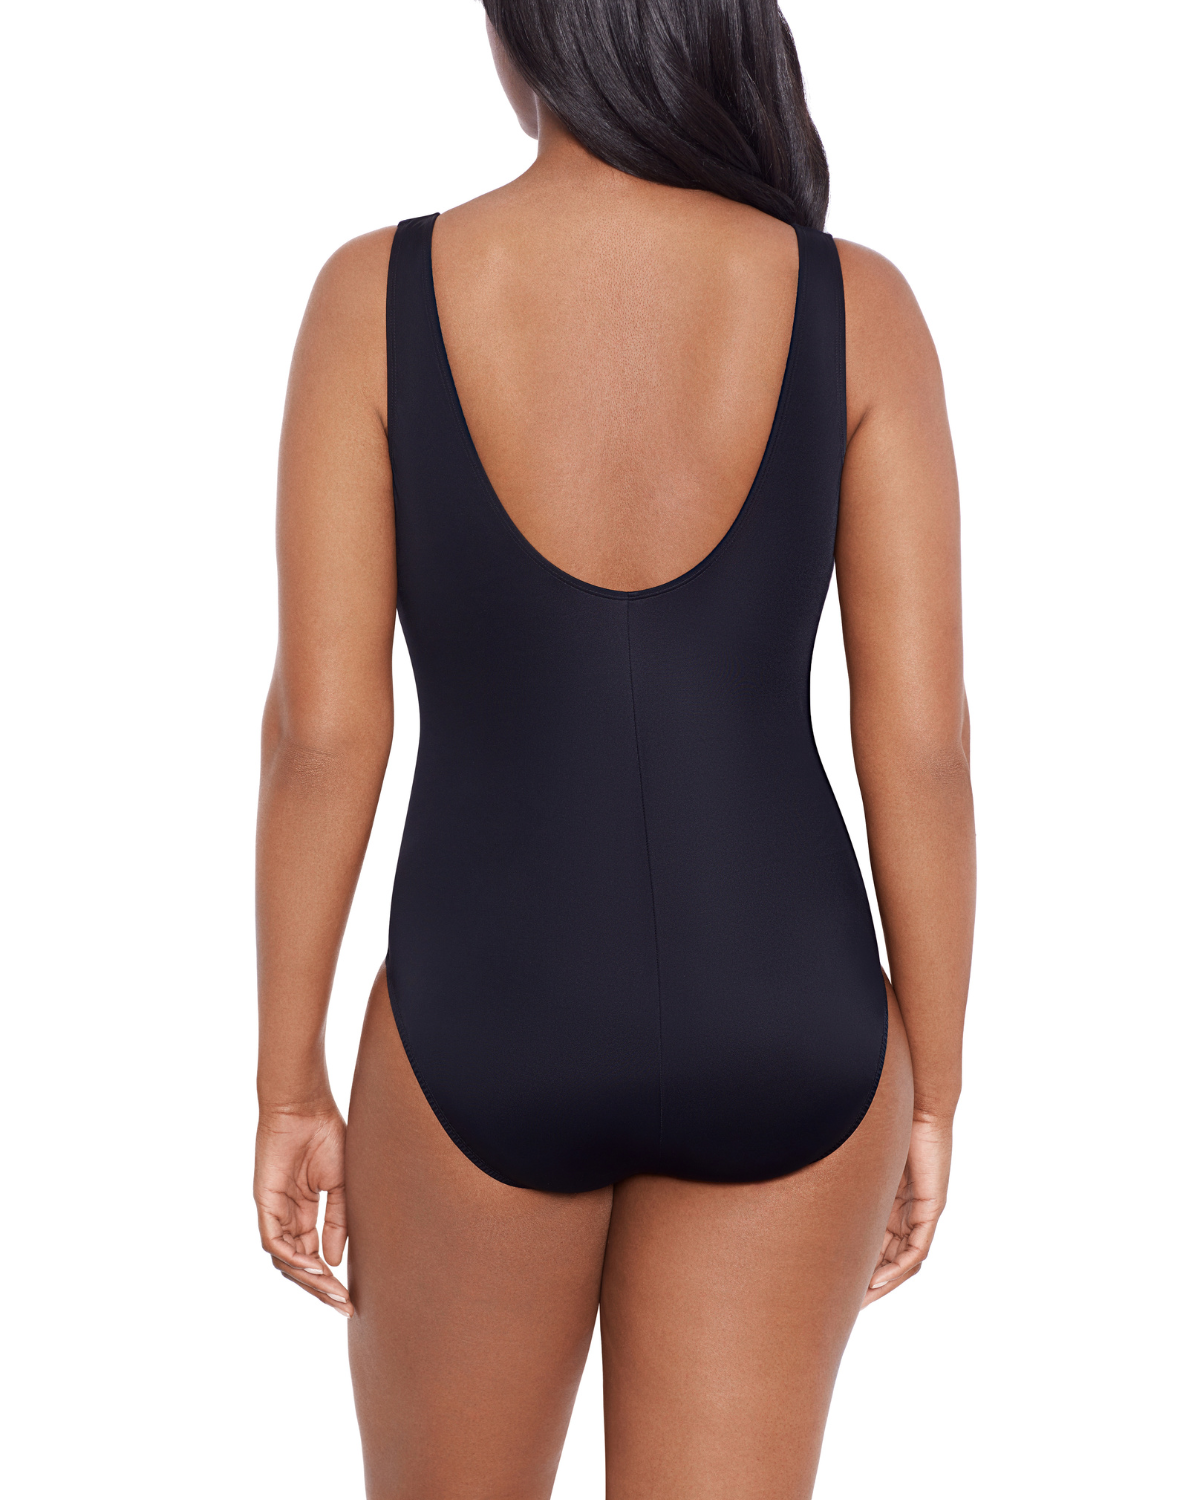 Model wearing a v neck one piece swimsuit in black with a spotted blue, white, navy and black top